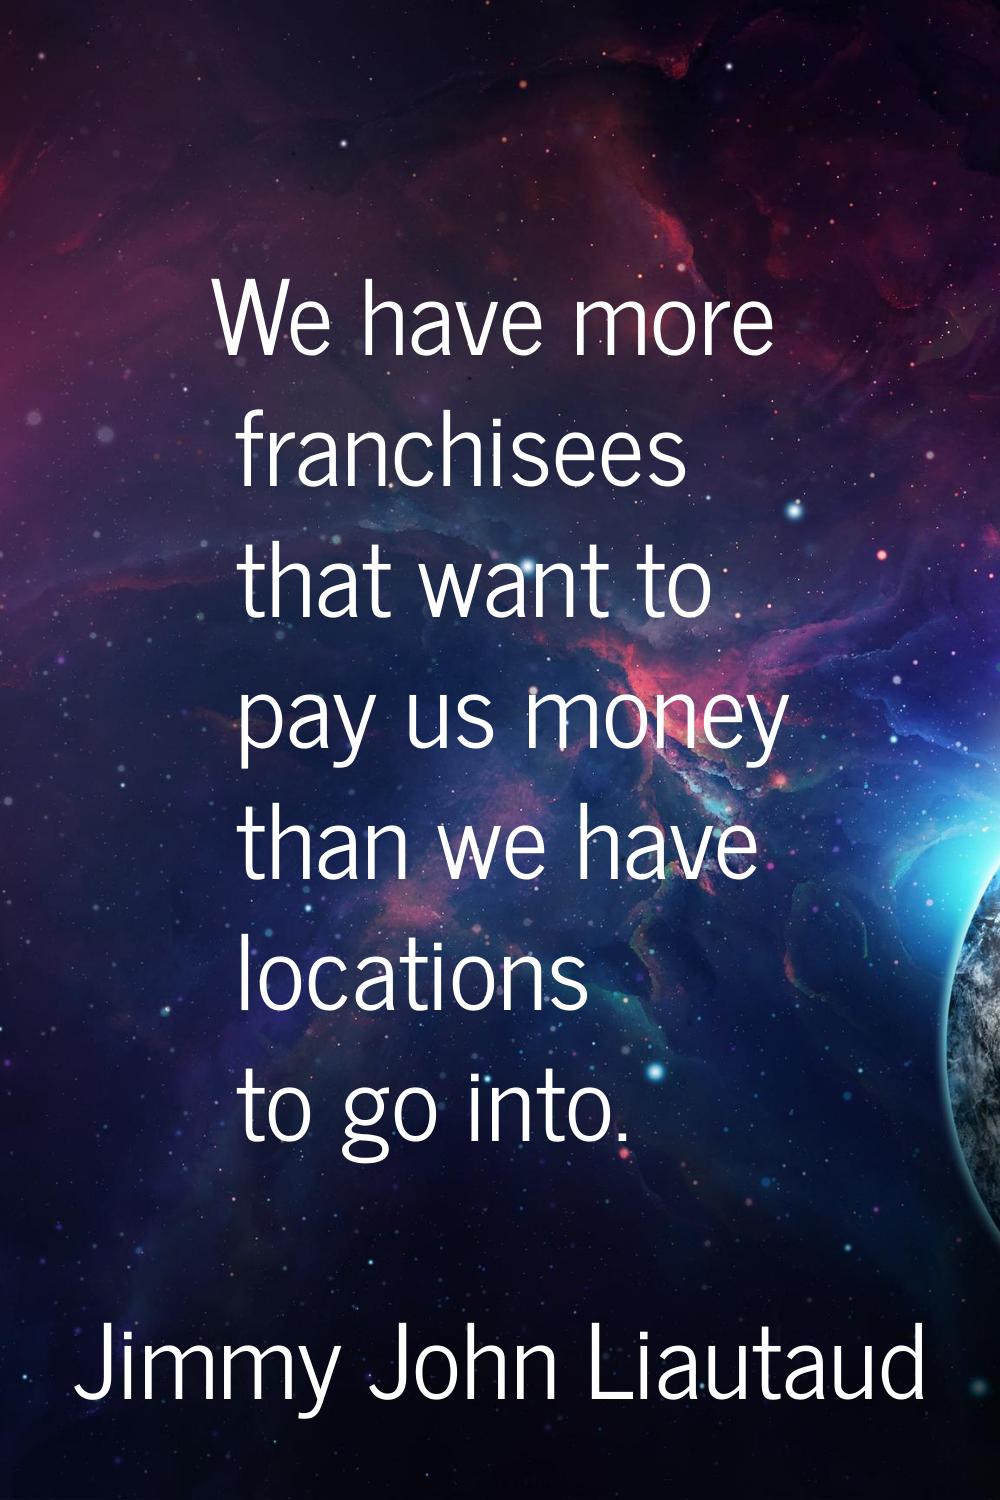 We have more franchisees that want to pay us money than we have locations to go into.